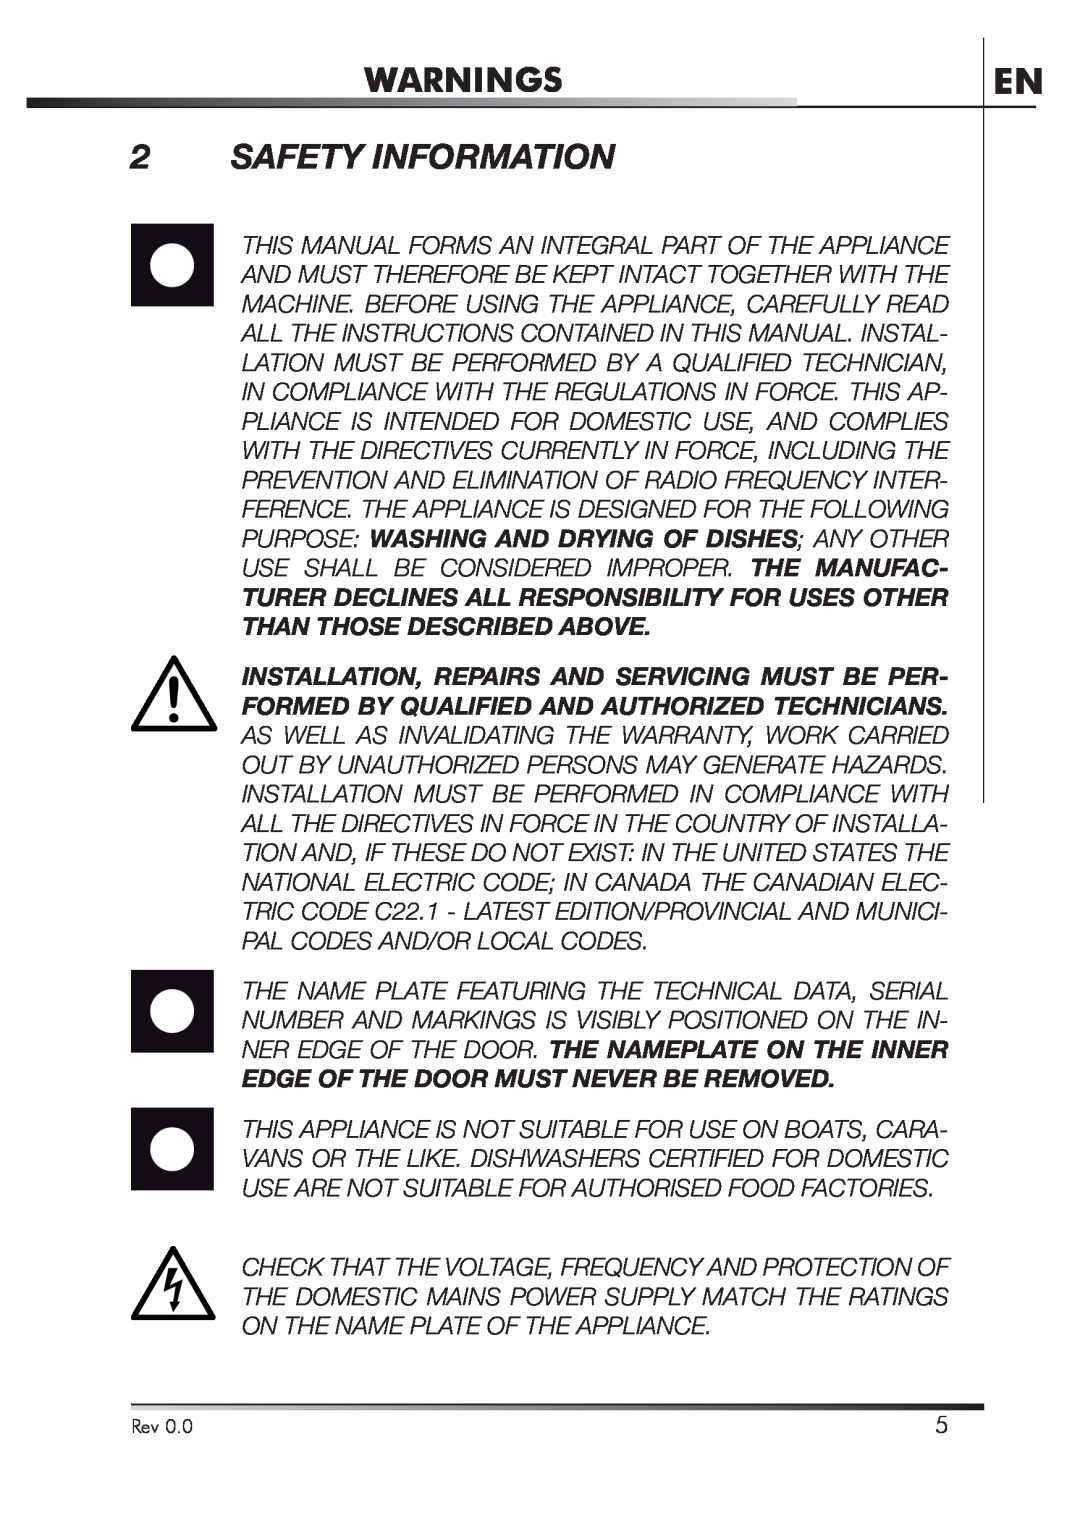 Smeg STA4645U manual Safety Information, Warnings, Edge Of The Door Must Never Be Removed 